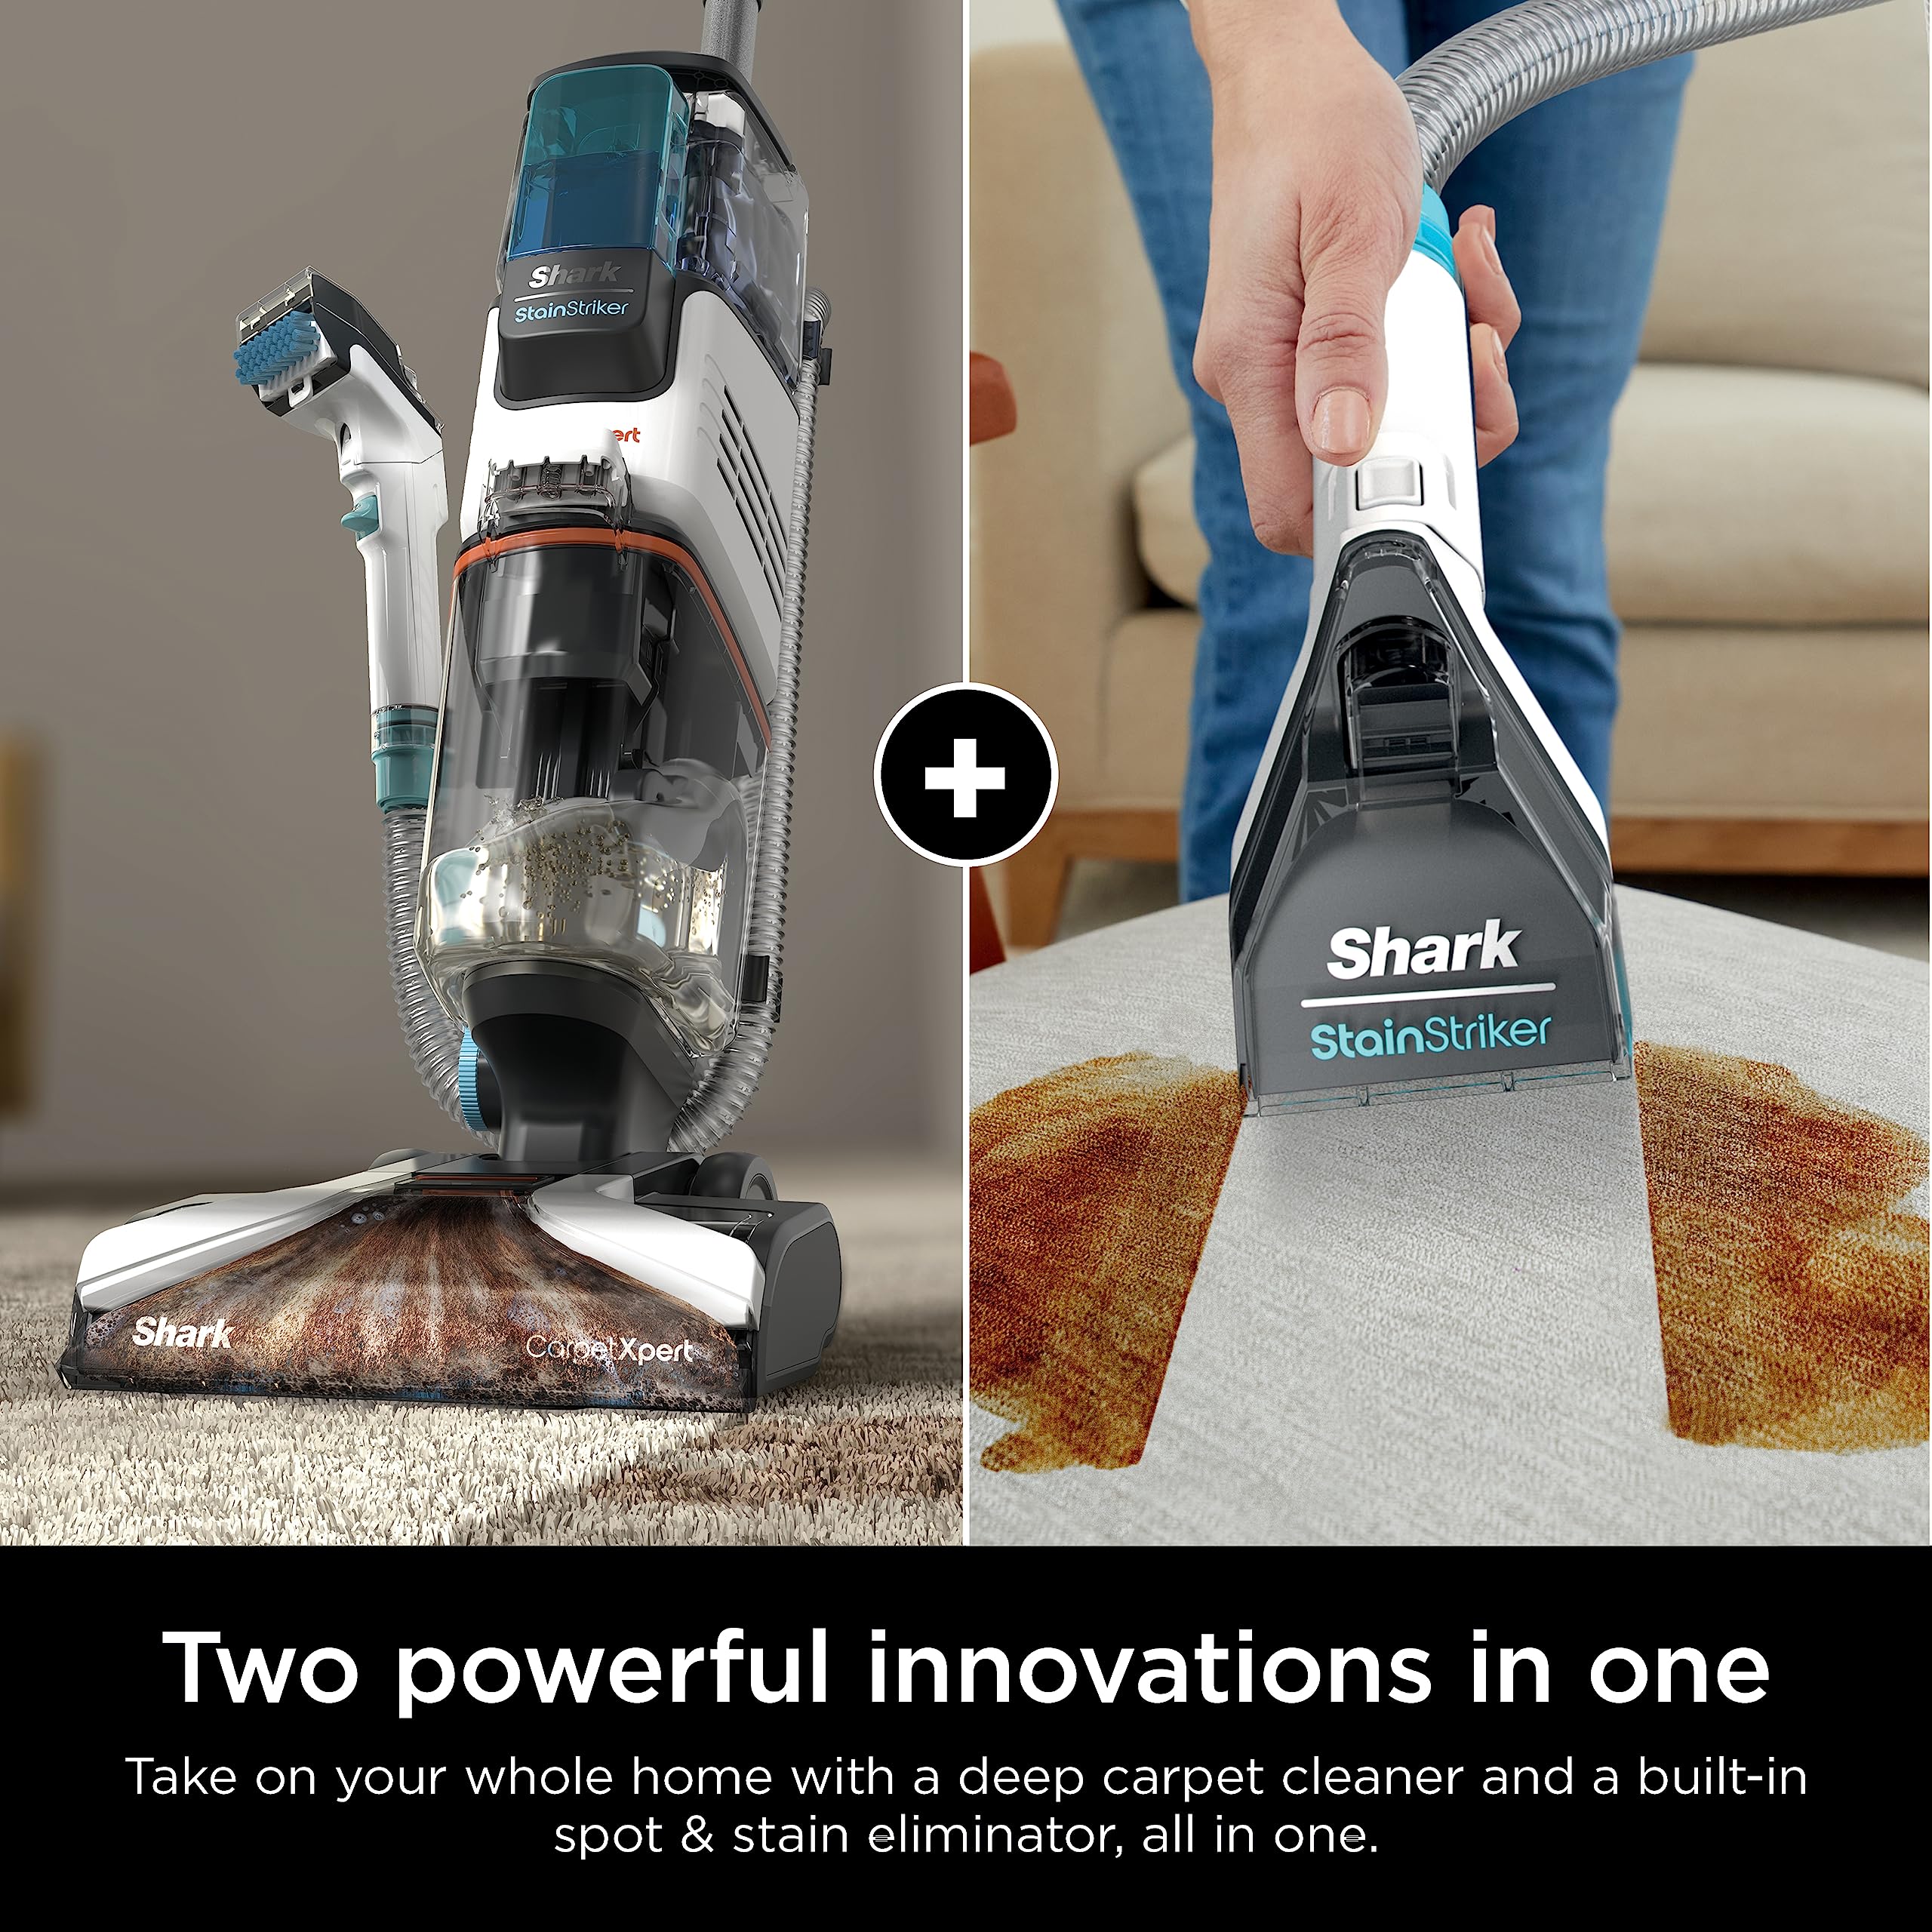 Shark EX201 CarpetXpert Upright Carpet, Area Rug & Upholstery Cleaner with StainStriker, Built-in Spot & Stain Cleaner, Perfect for Pets, Deep Cleaning & Tough Stain Removal, Carpet Shampooer, Teal